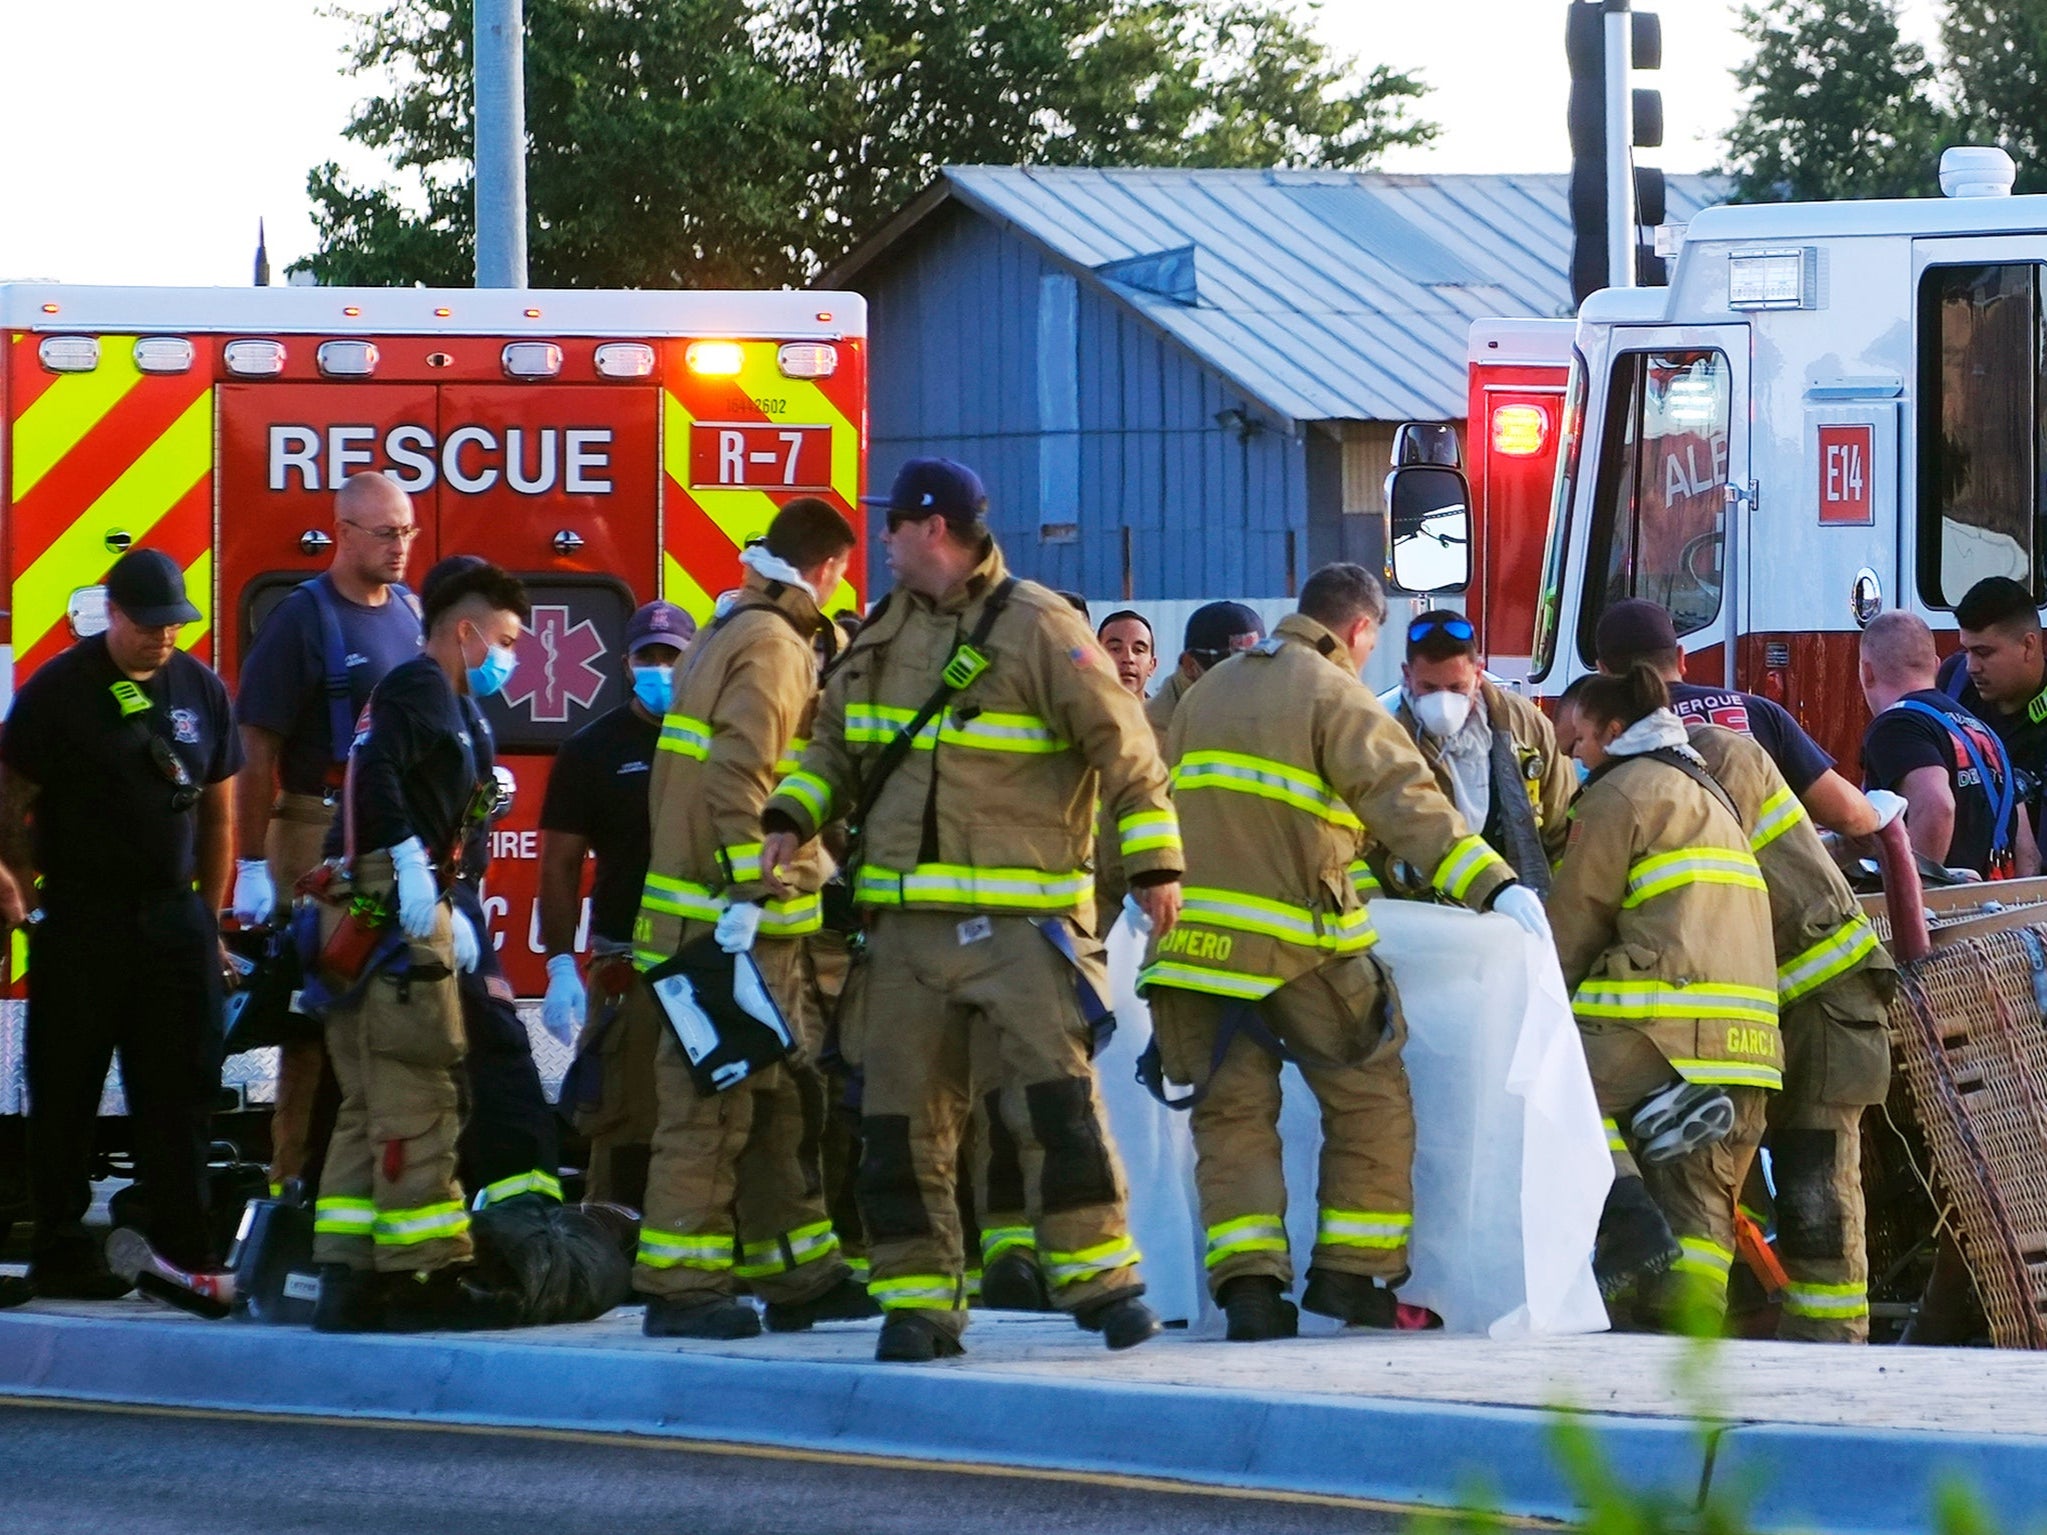 Albuquerque Fire Rescue crews work on victims of the fatal balloon crash at Unser and Central SW in Albuquerque, N.M., on Saturday, June 26, 2021